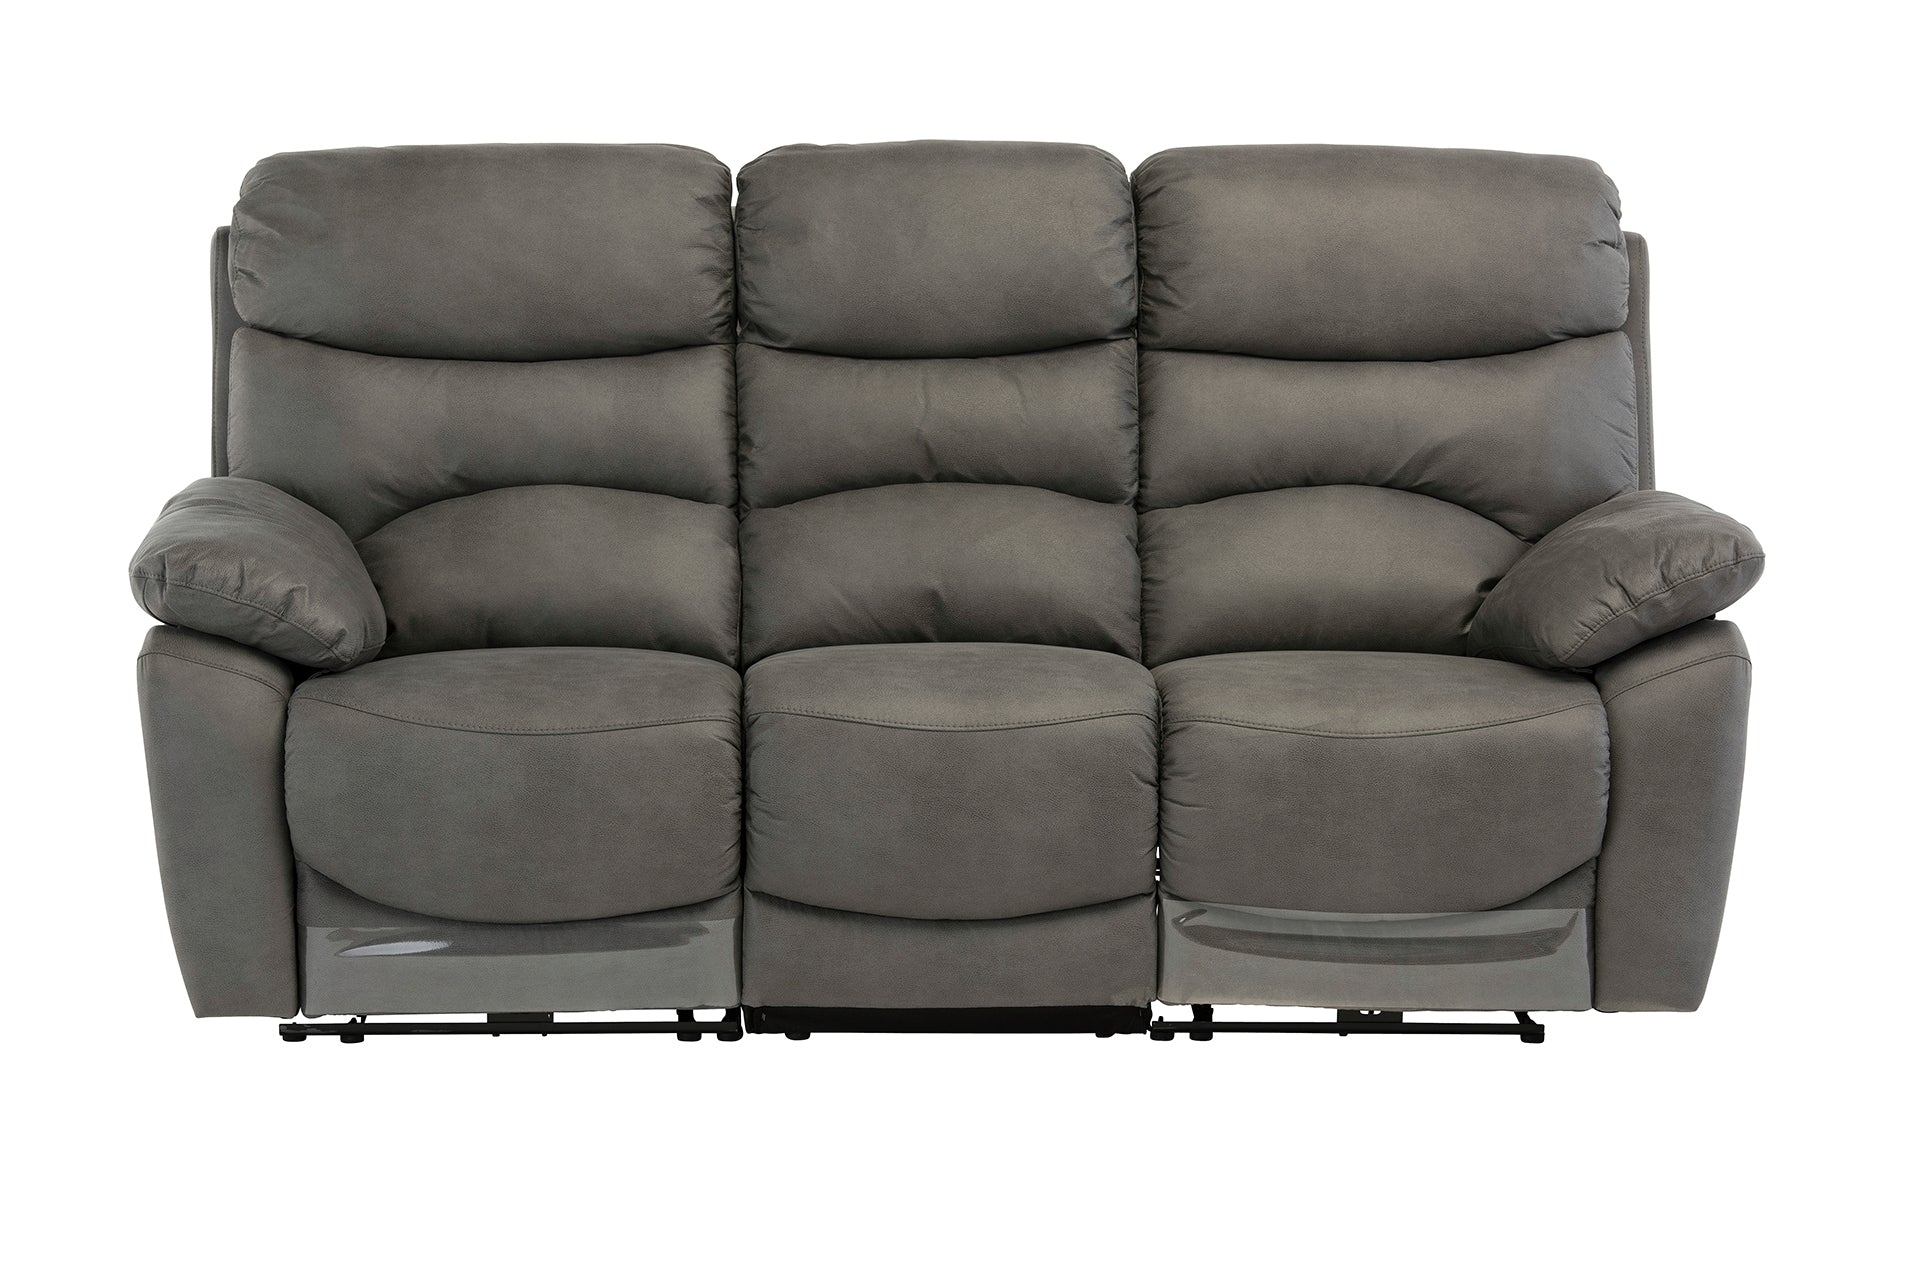 Lola Electric Recliner 3 Seater Sofa – USB Ports, Grey – Lc Living